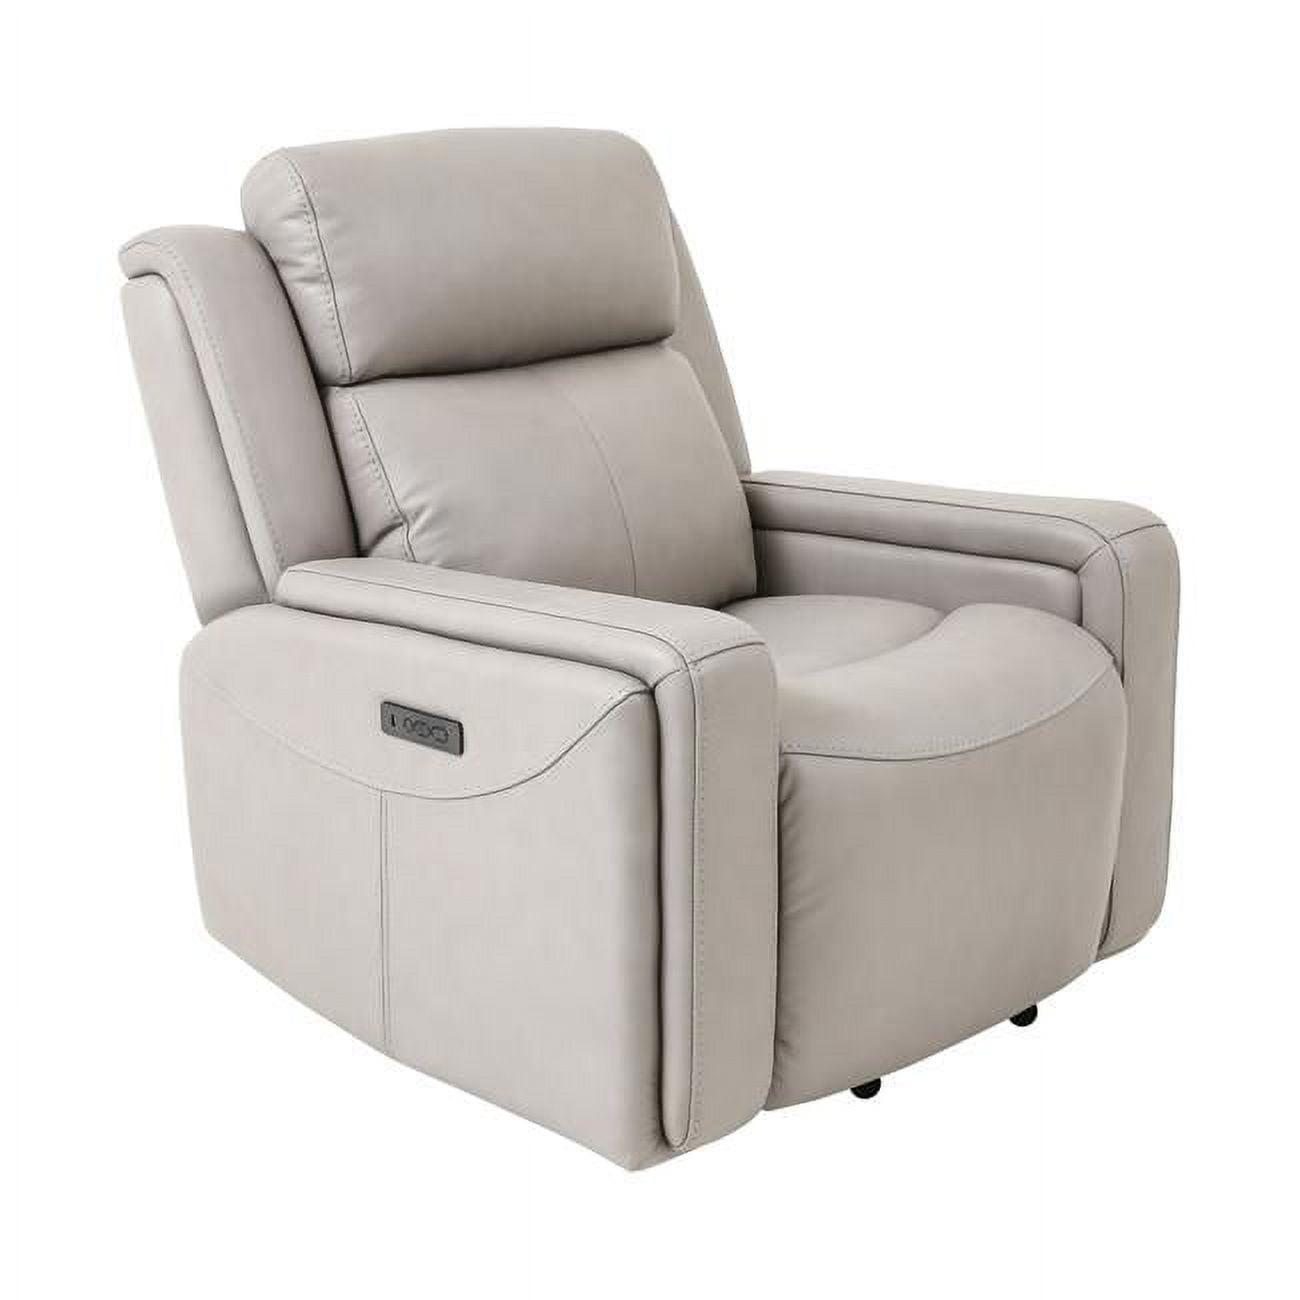 Claude 37" Gray Genuine Leather Recliner with Wood Frame